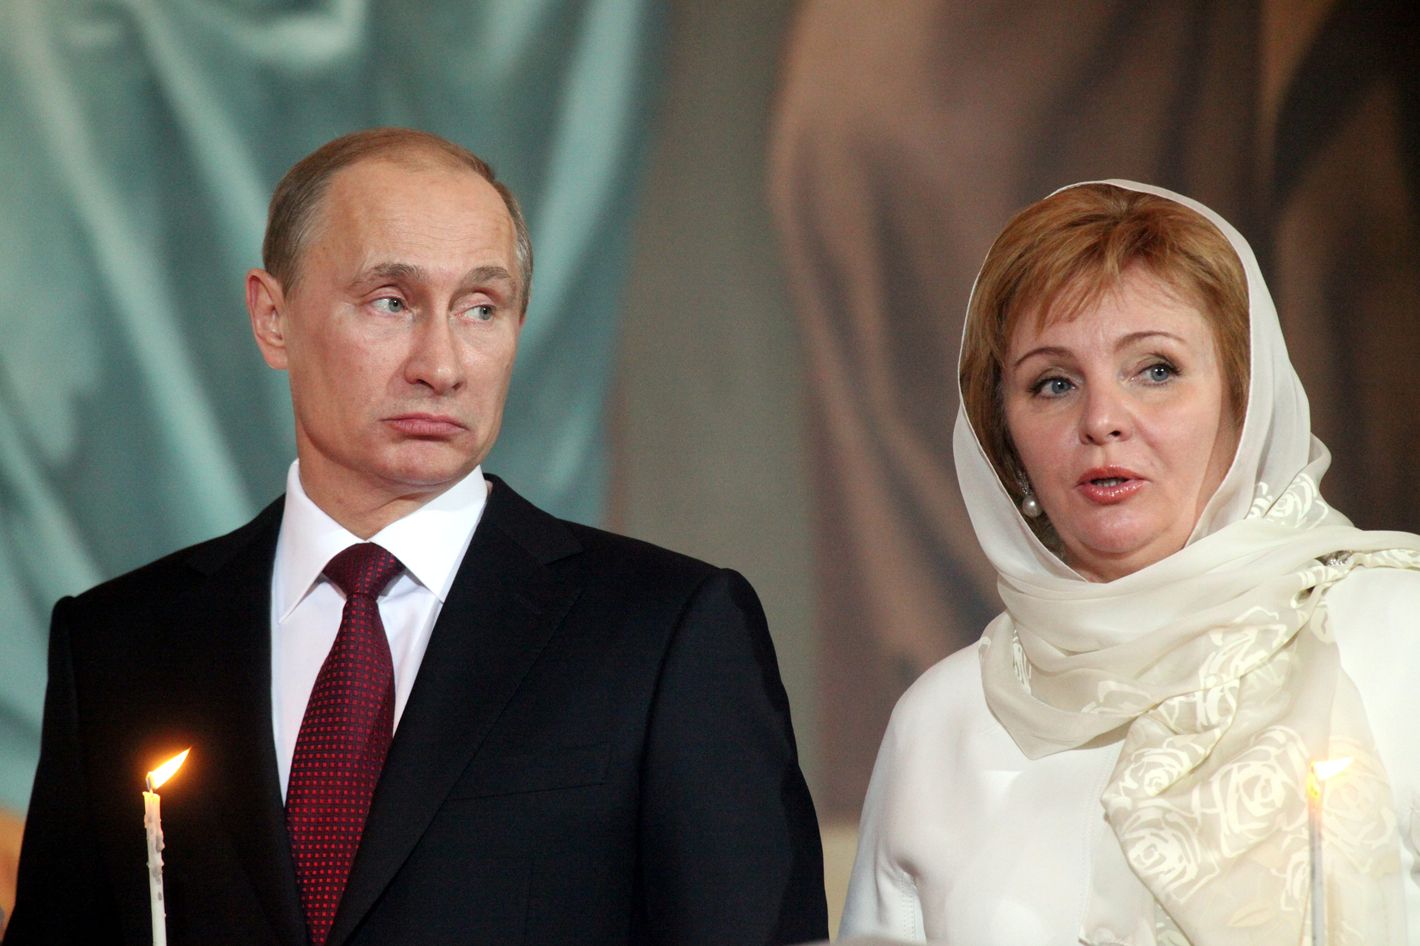 5 Photos Of Vladimir Putin And His Wife Looking Miserable Together